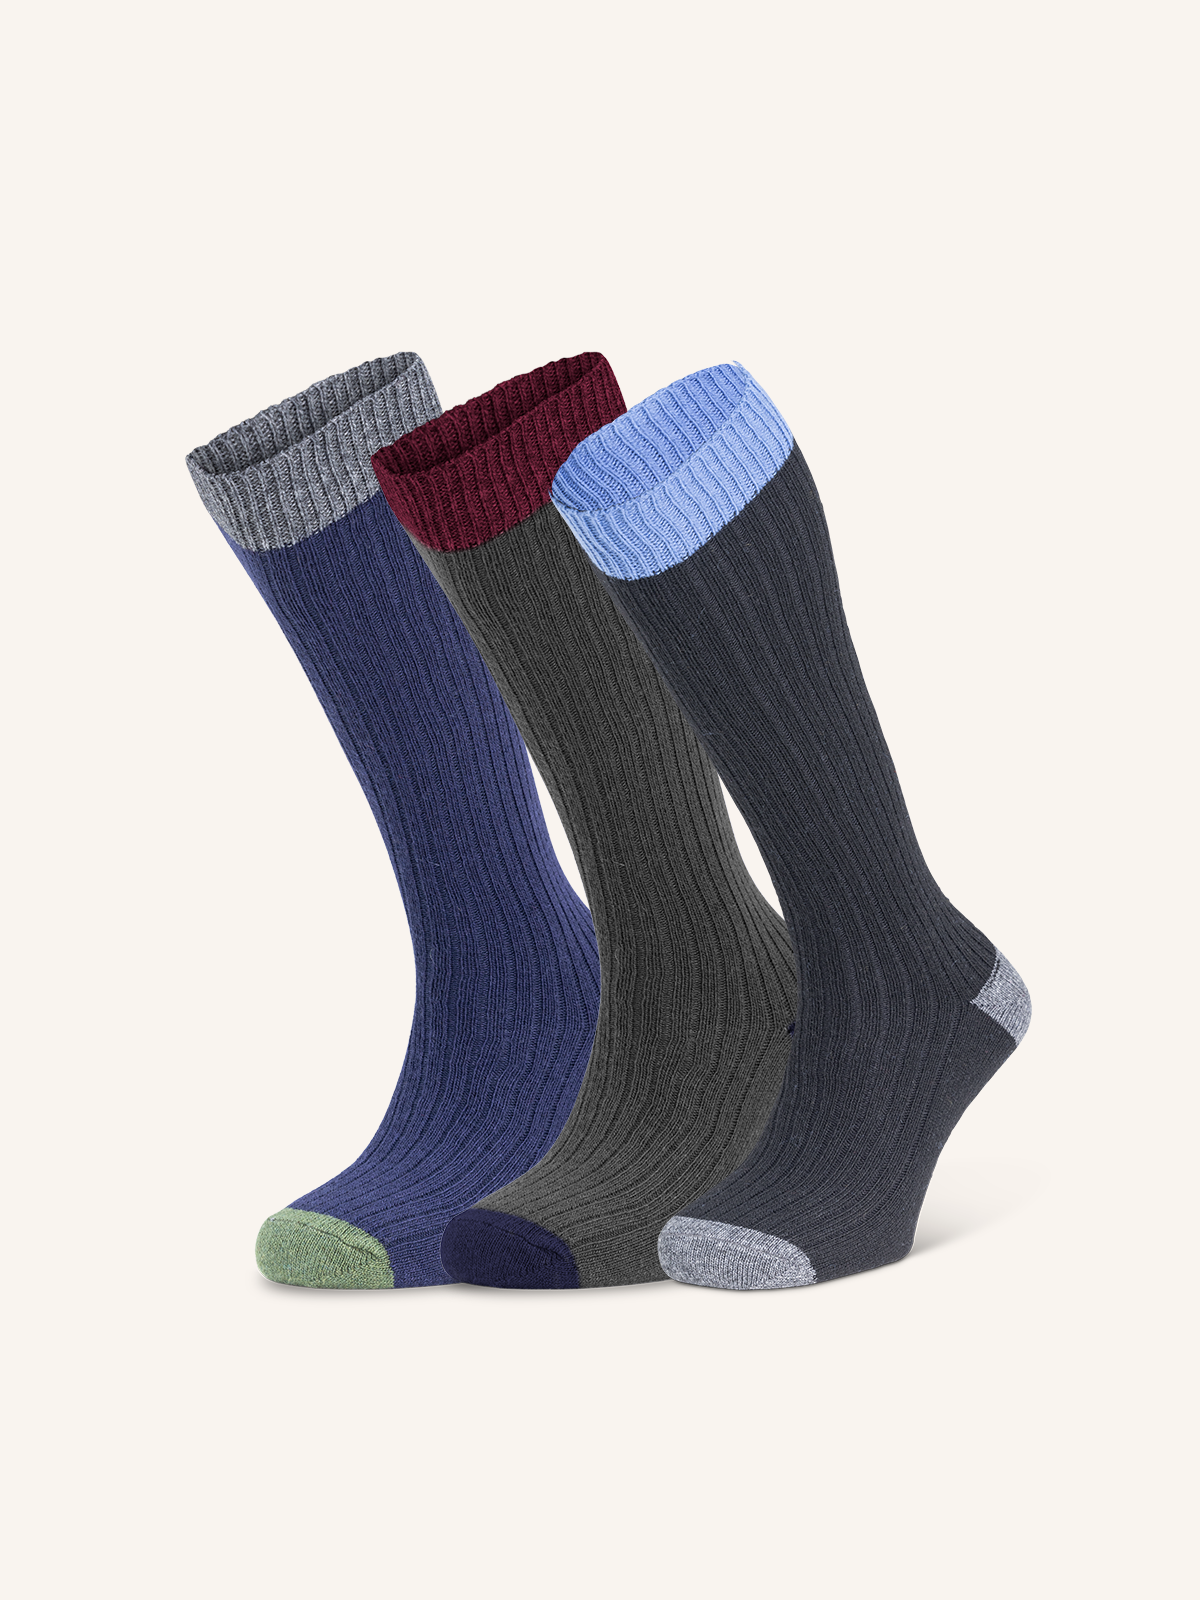 Long socks in Cashmere and Wool blend for Men | Plain Color | Pack of 3 Pairs | Cachelife UL